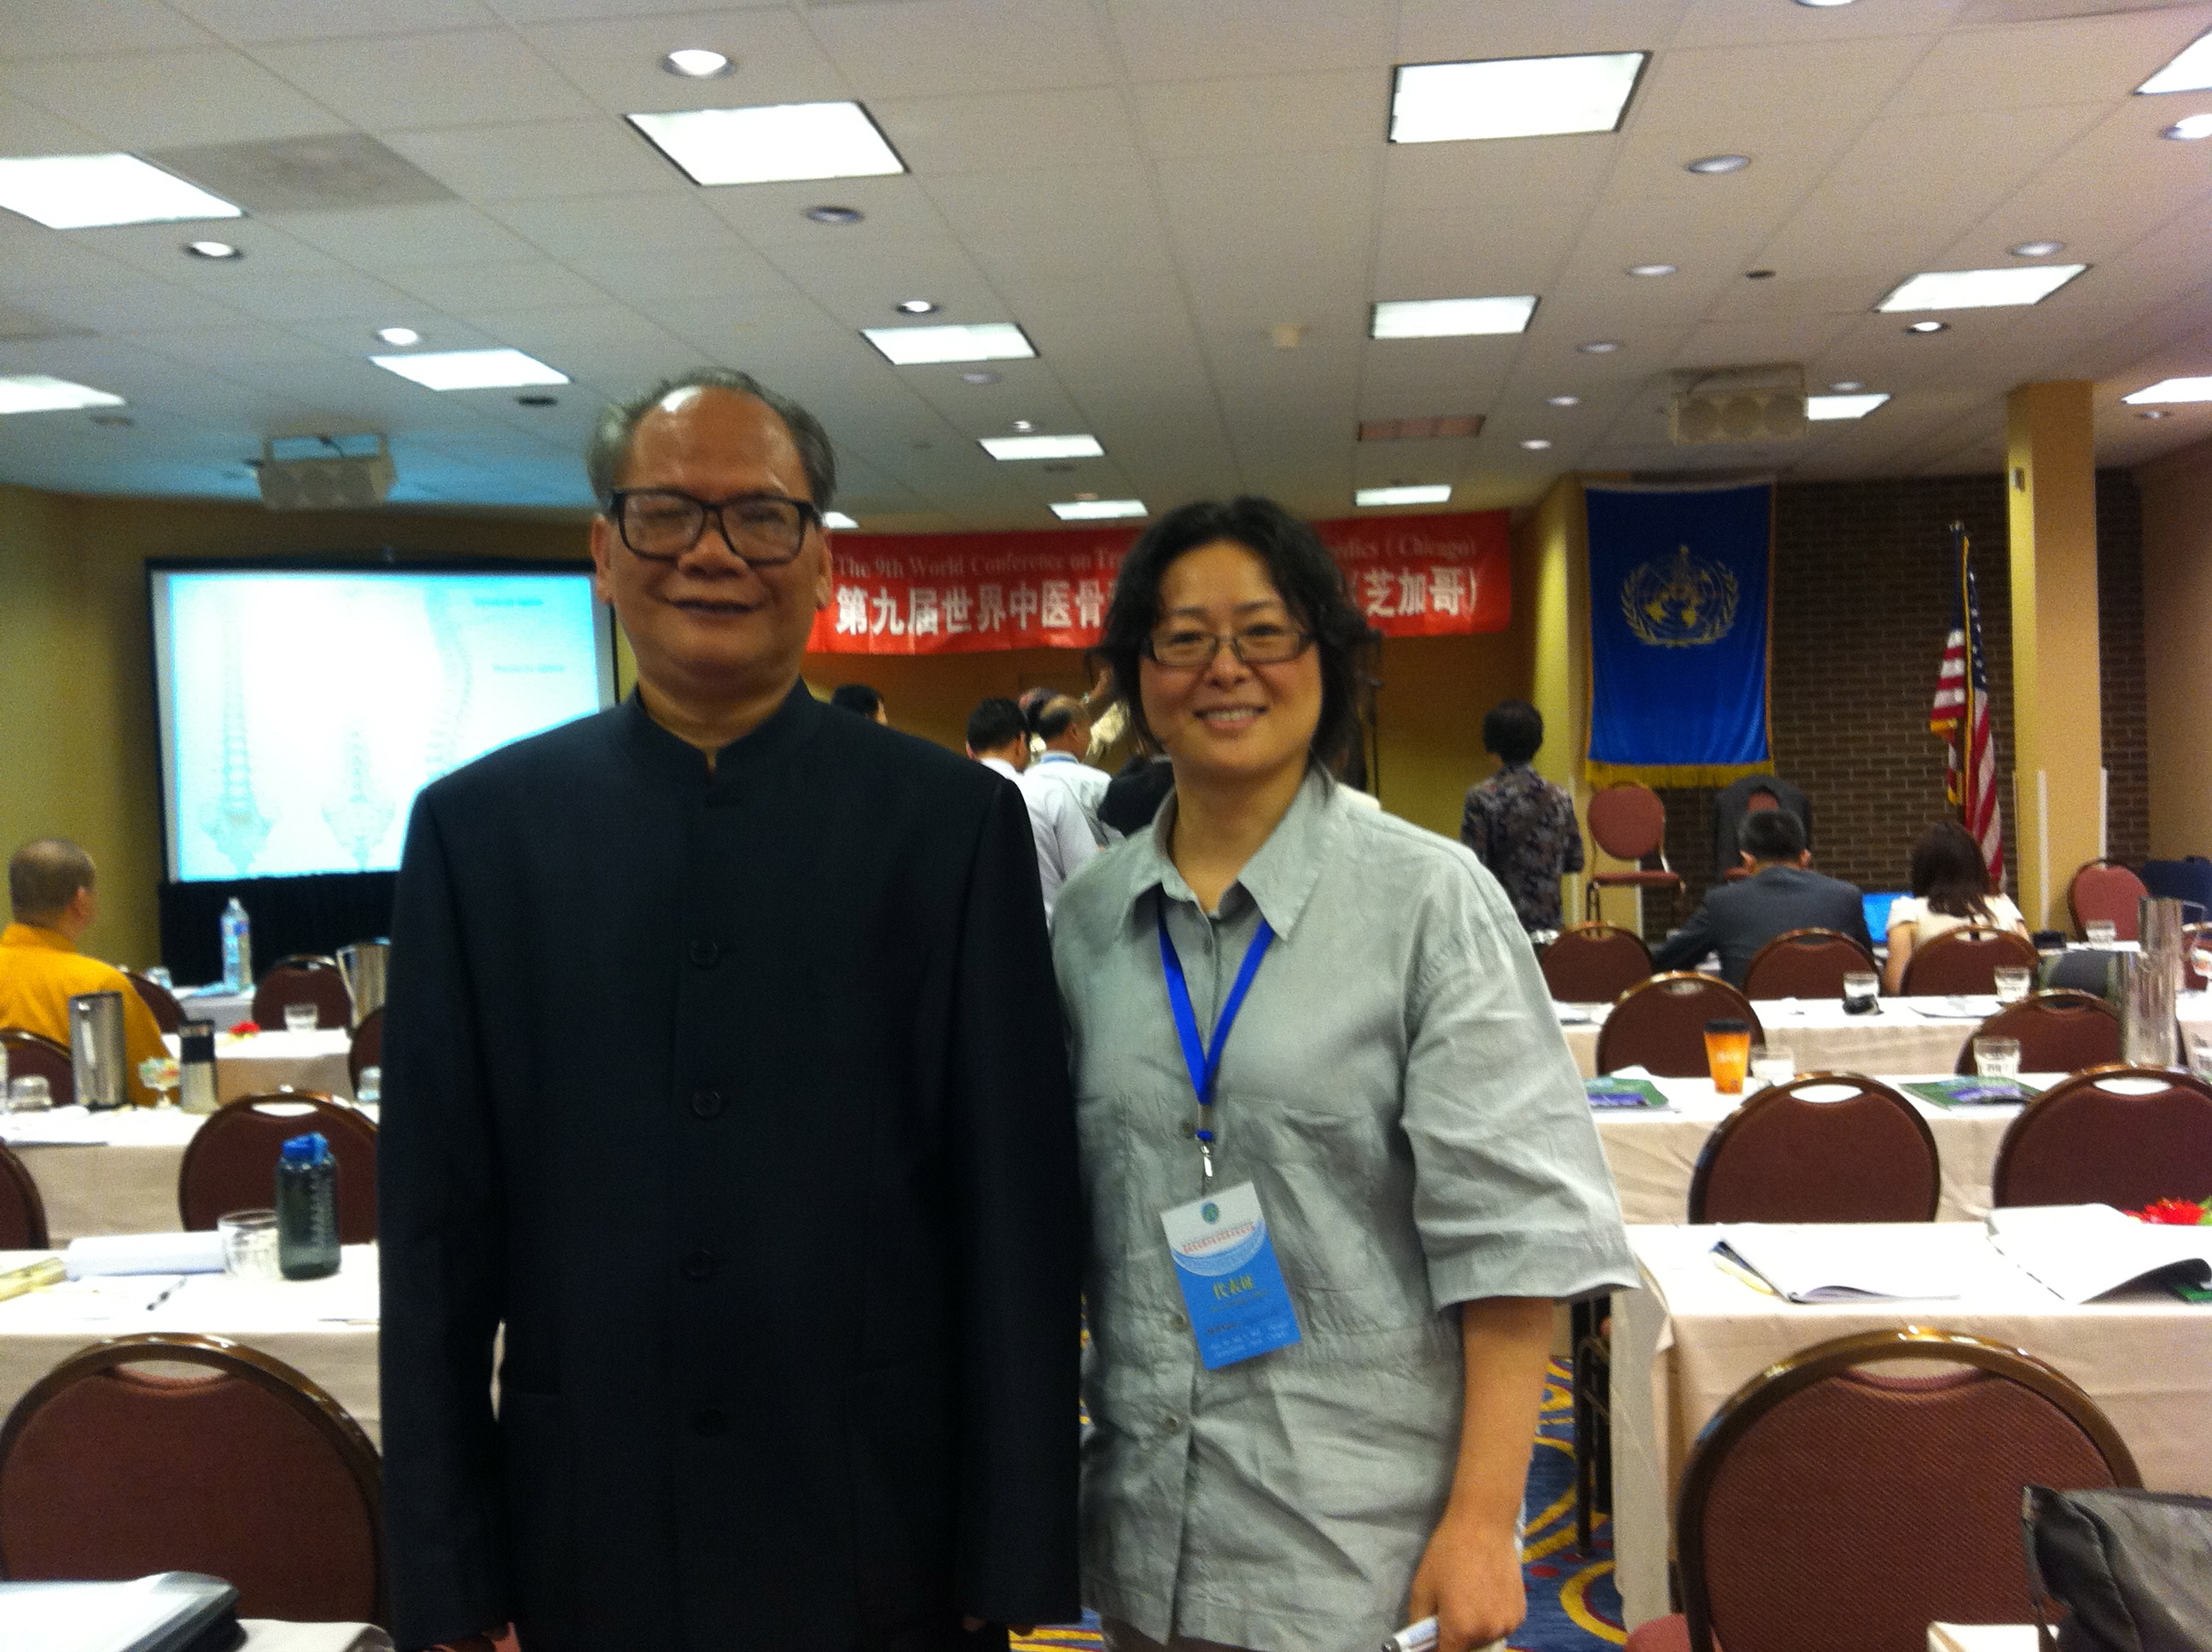 With Professor Wei, YiZhong from China at the 9th World Conference on Traditional Chinese Orthopedics in Chicago